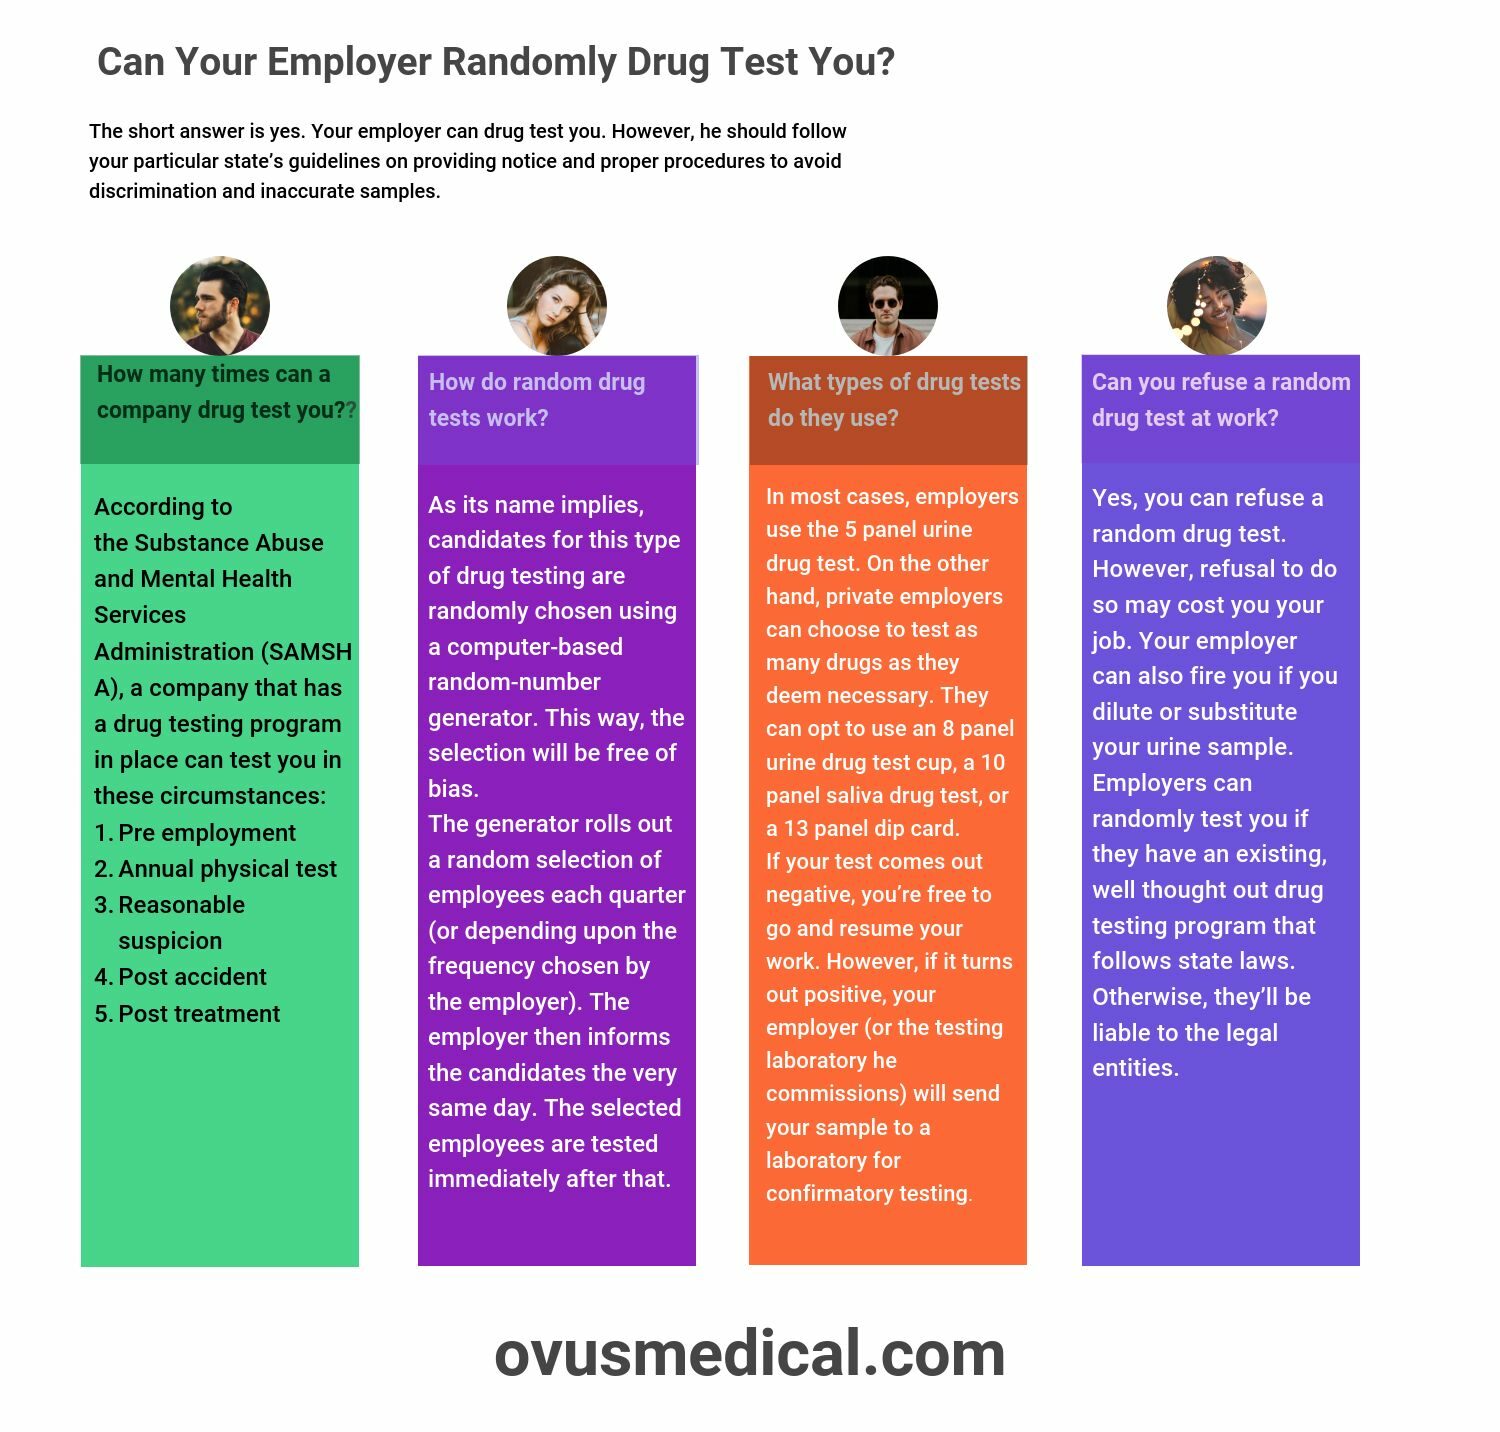 OVUS MEDICAL can-your-employer-randomly-drug-test-you